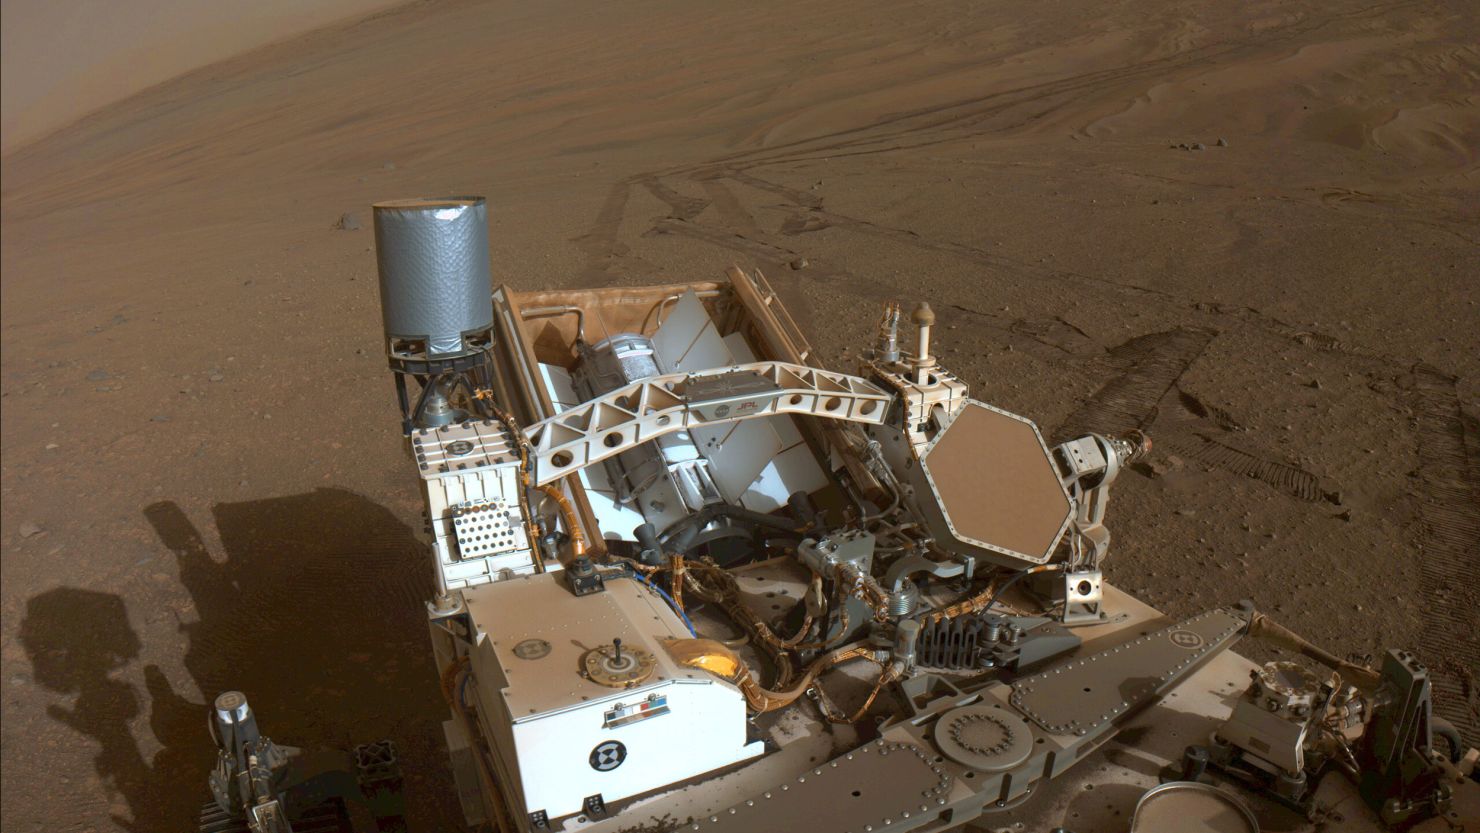 NASA’s Perseverance rover has been collecting samples to be returned to Earth in a technologically daring mission called Mars Sample Return (MSR).